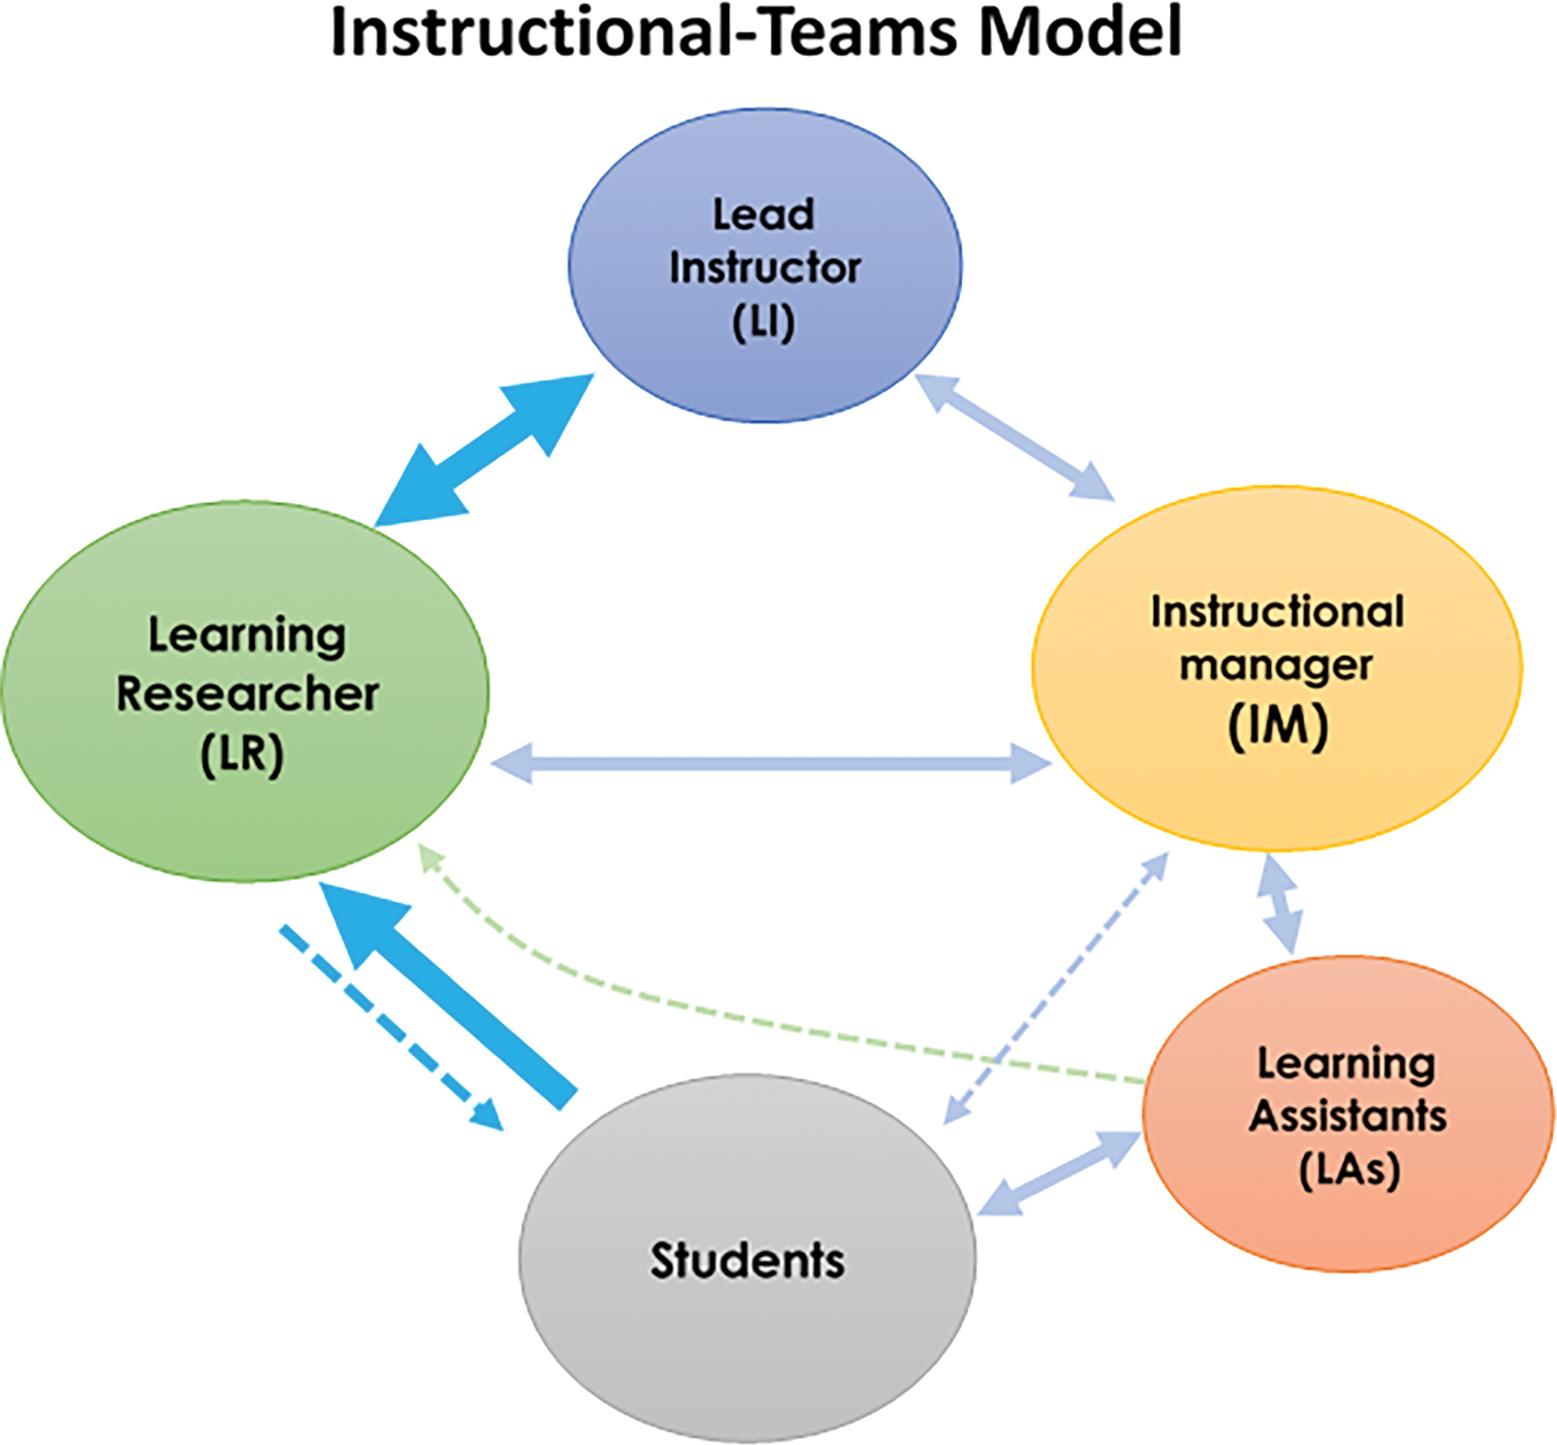 Our instructional-teams model includes a faculty member serving as the lead instructor (LI), an instructional manager (IM), a learning researcher (LR), and several learning assistants (LAs). The LI is responsible for planning instruction and coordinating team activities. The IM provides support on classroom management issues. LAs help guide student work during classroom activities, and the LR observes and interprets student thinking during these in-class tasks, creating a daily formative report for the LI.